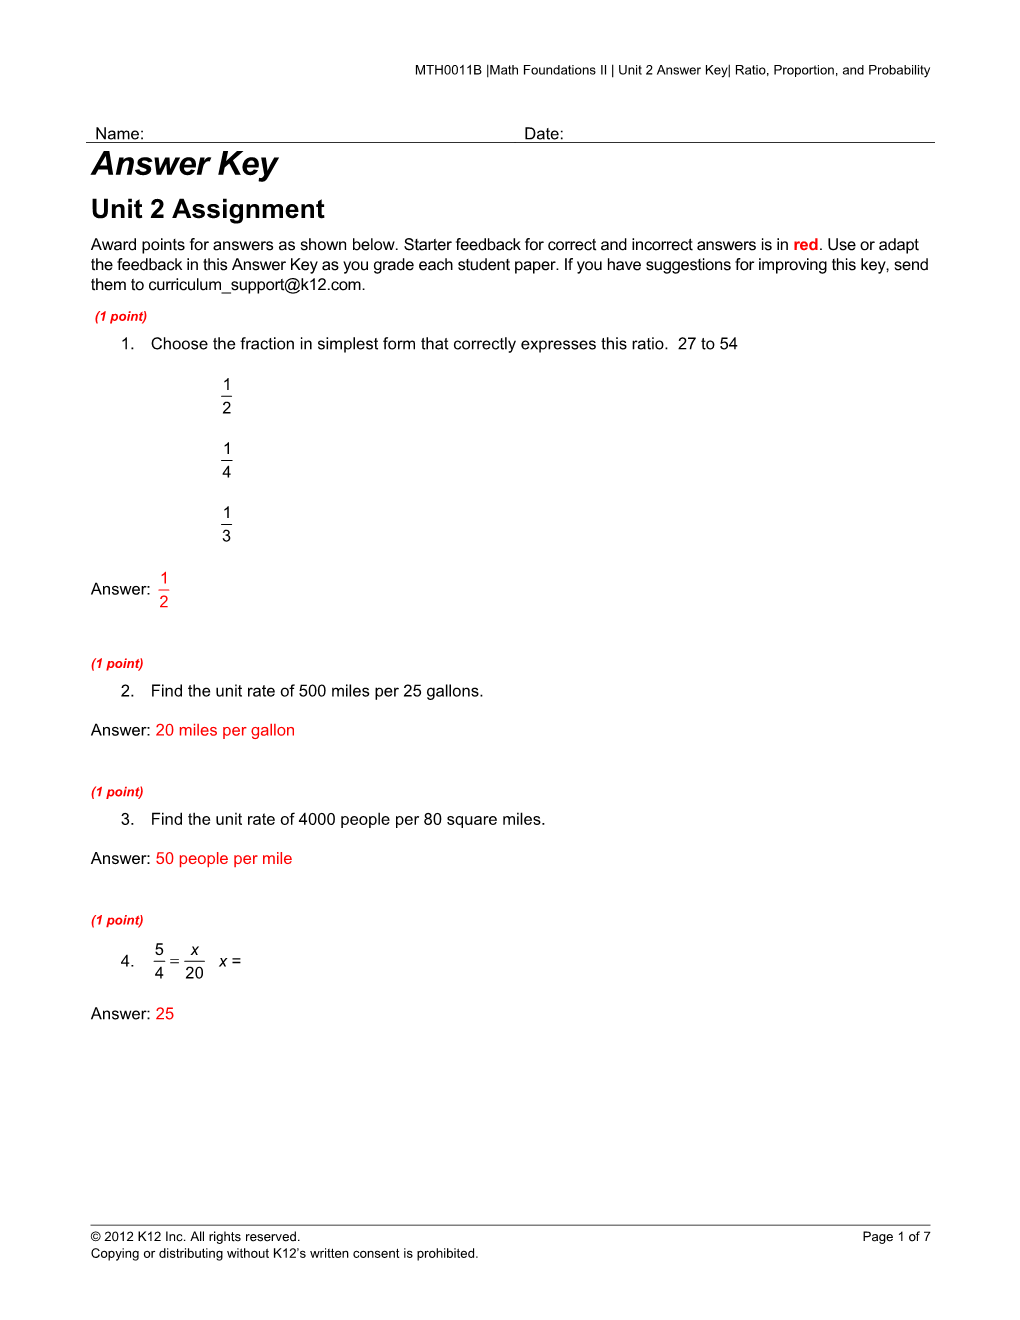 MTH0011B Math Foundations II Unit 2Answer Key Ratio, Proportion, and Probability